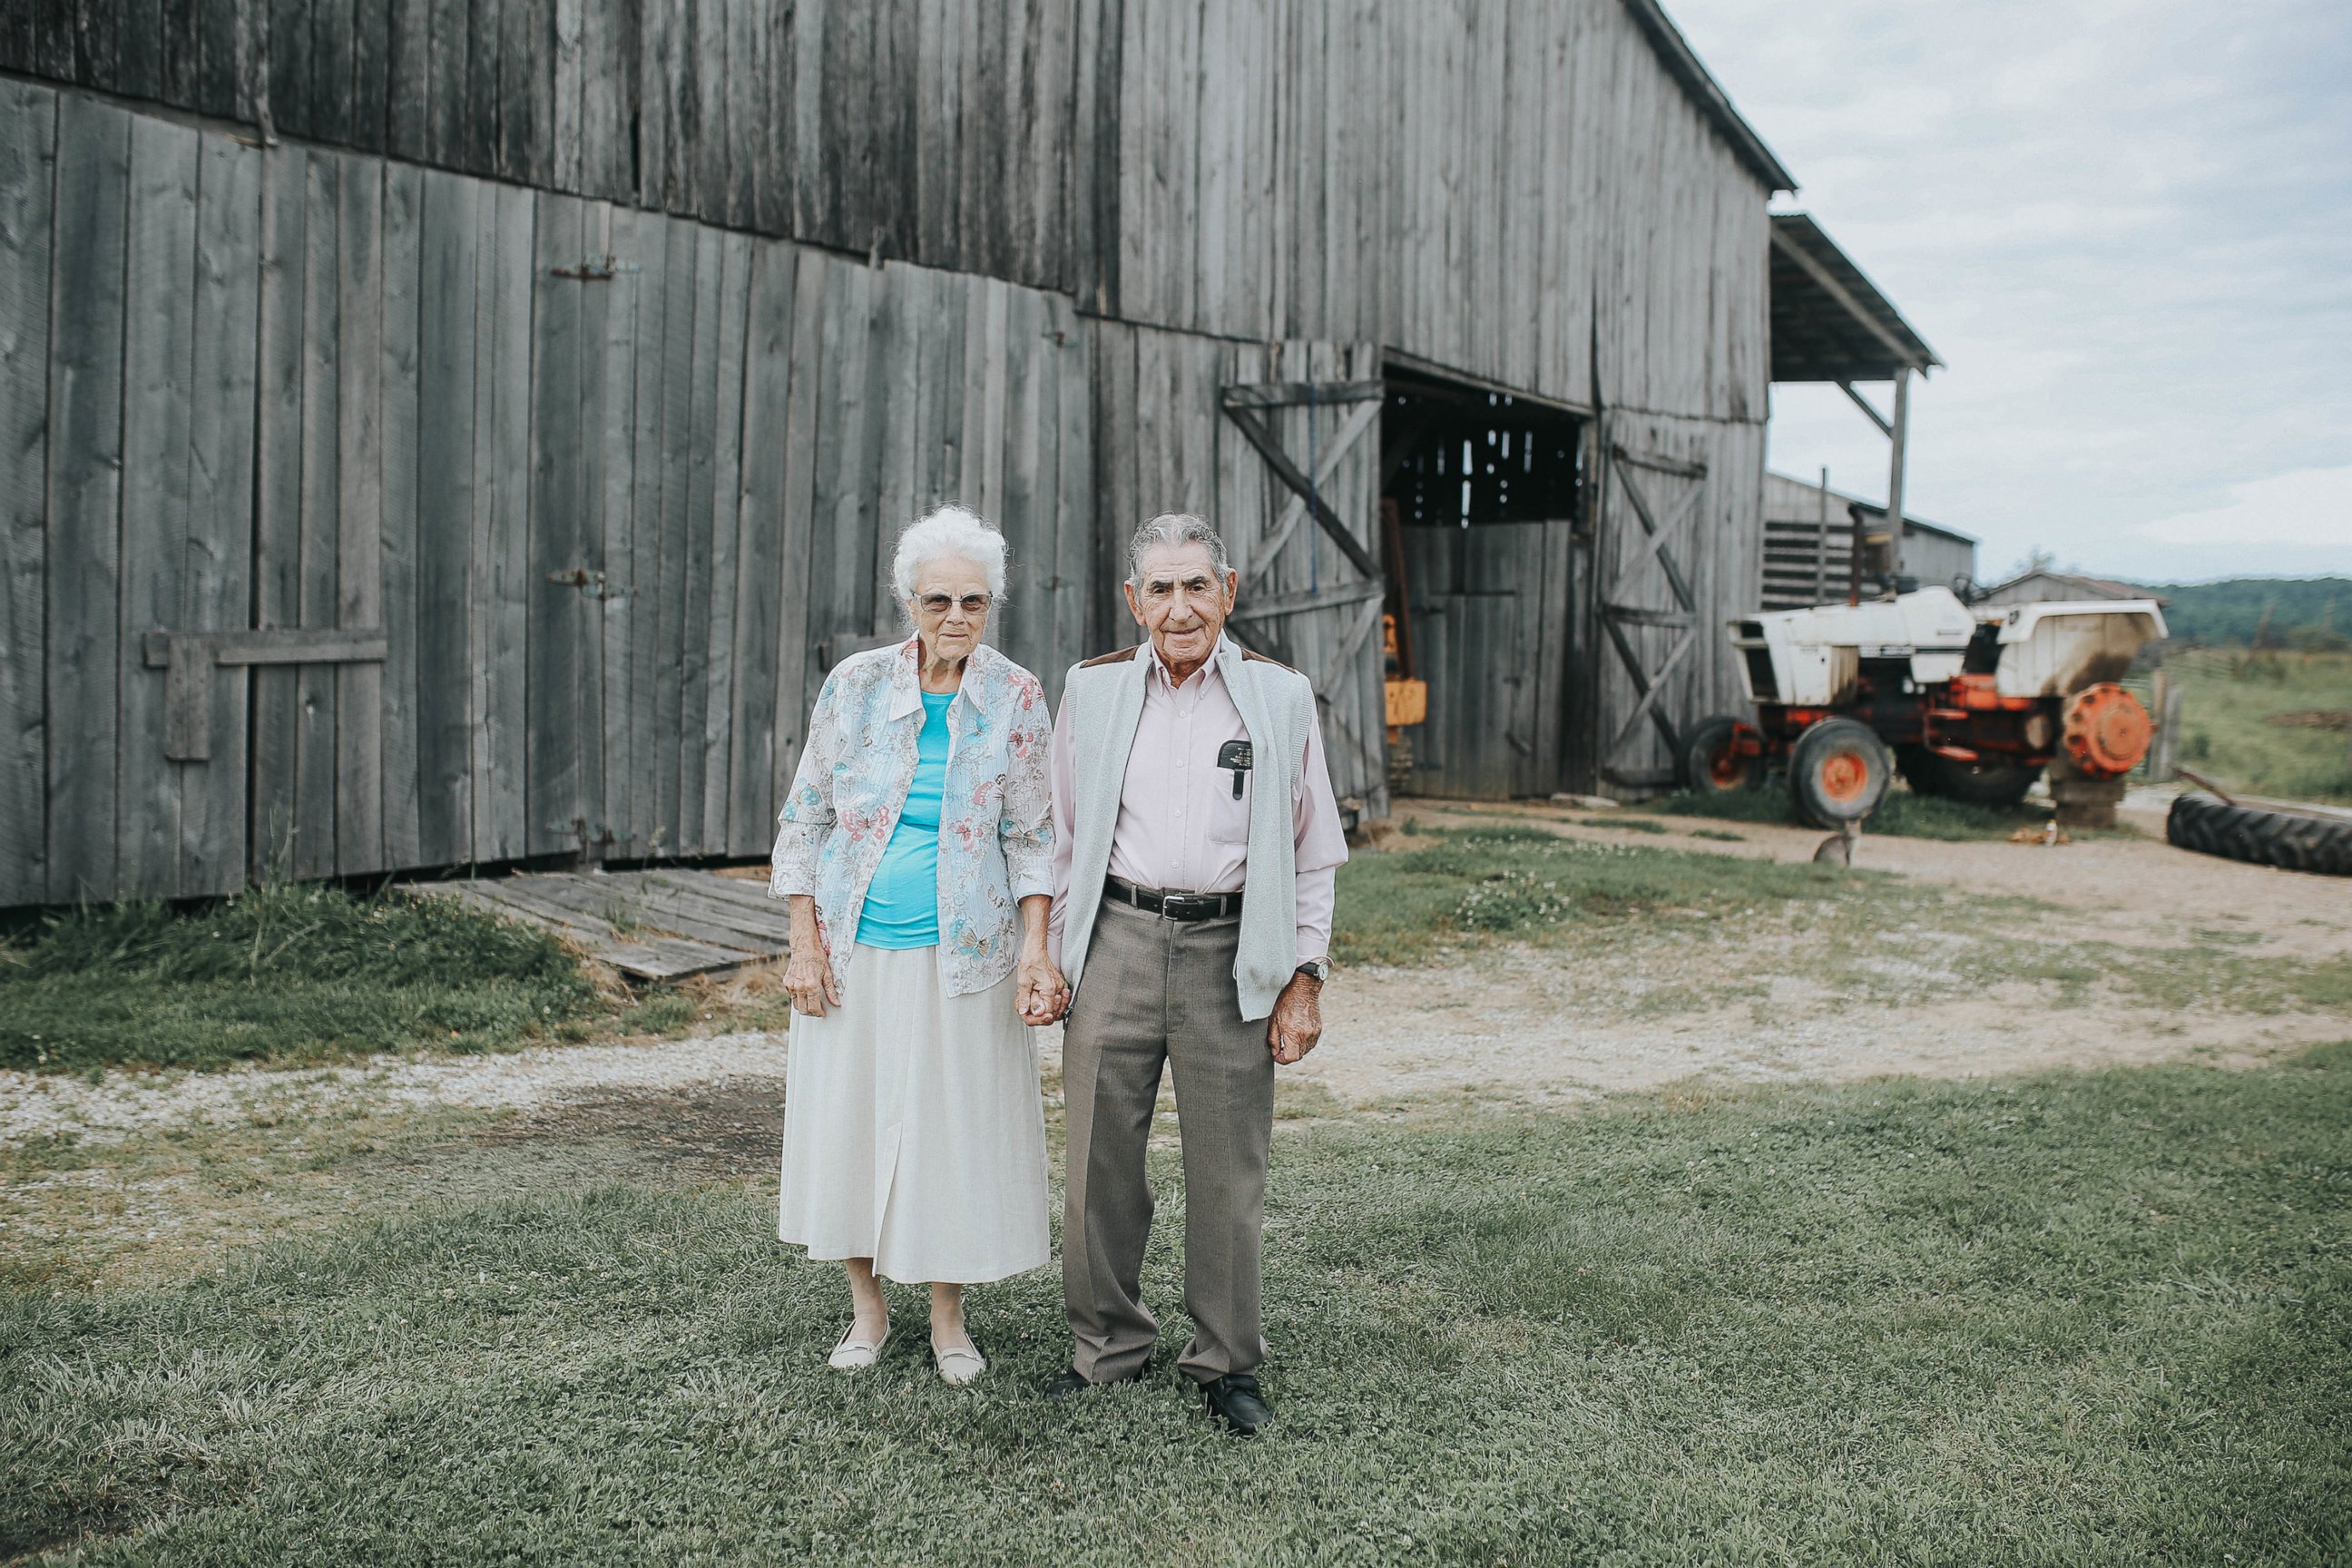 PHOTO: Ollie and Donald King's granddaughter arranged for the lovebirds to have a photo shoot on their farm in Crab Orchard, Ky.